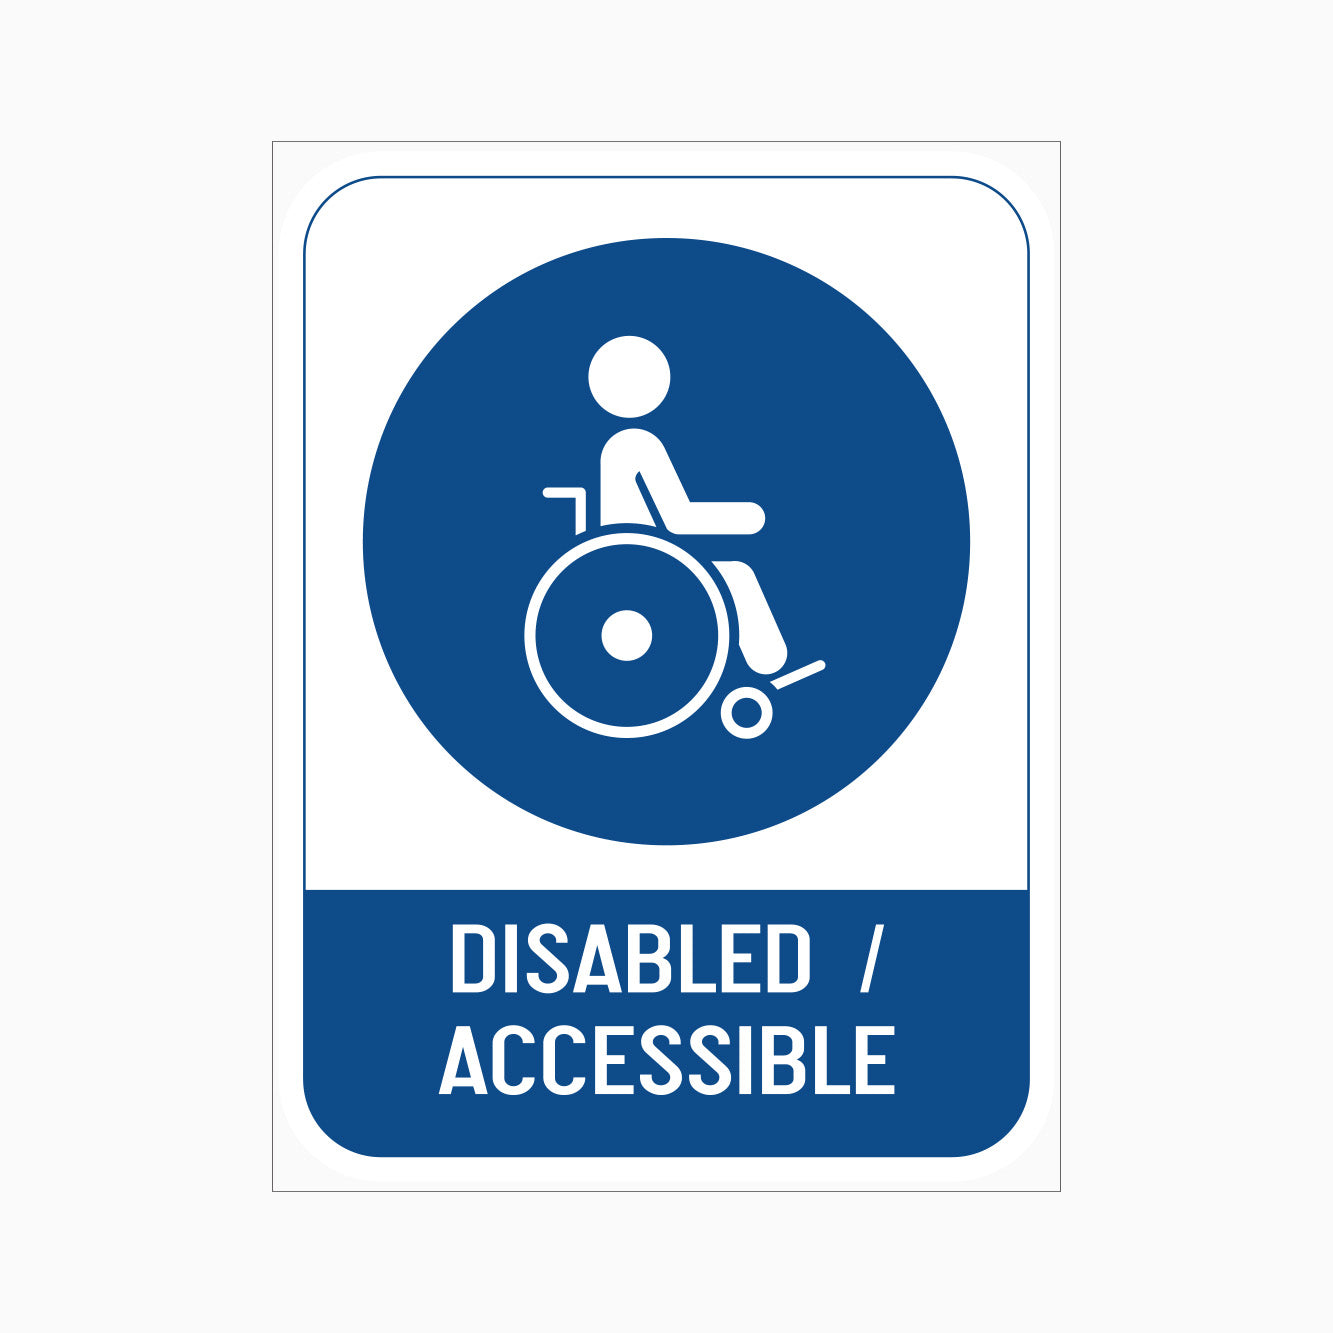 DISABLED AND ACCESSIBLE SIGN